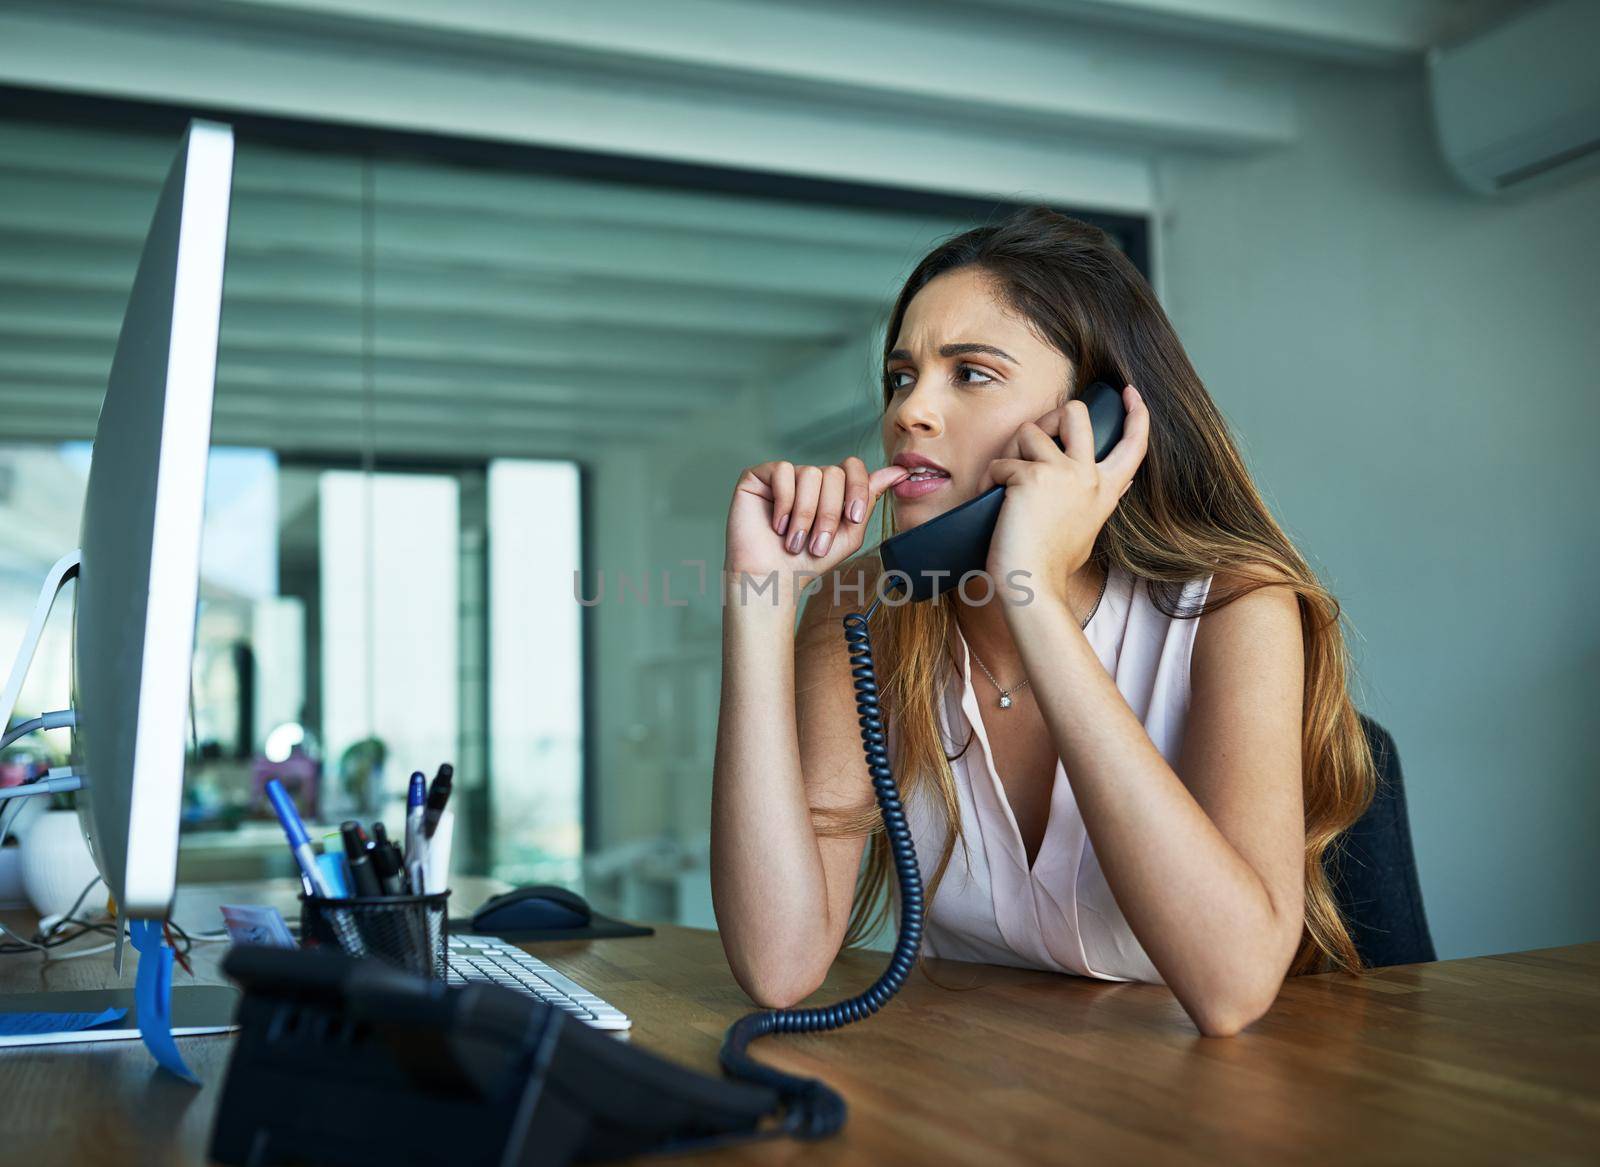 Sometimes anxiety gets the best of her. a young businesswoman biting her nails while talking on a phone in an office. by YuriArcurs